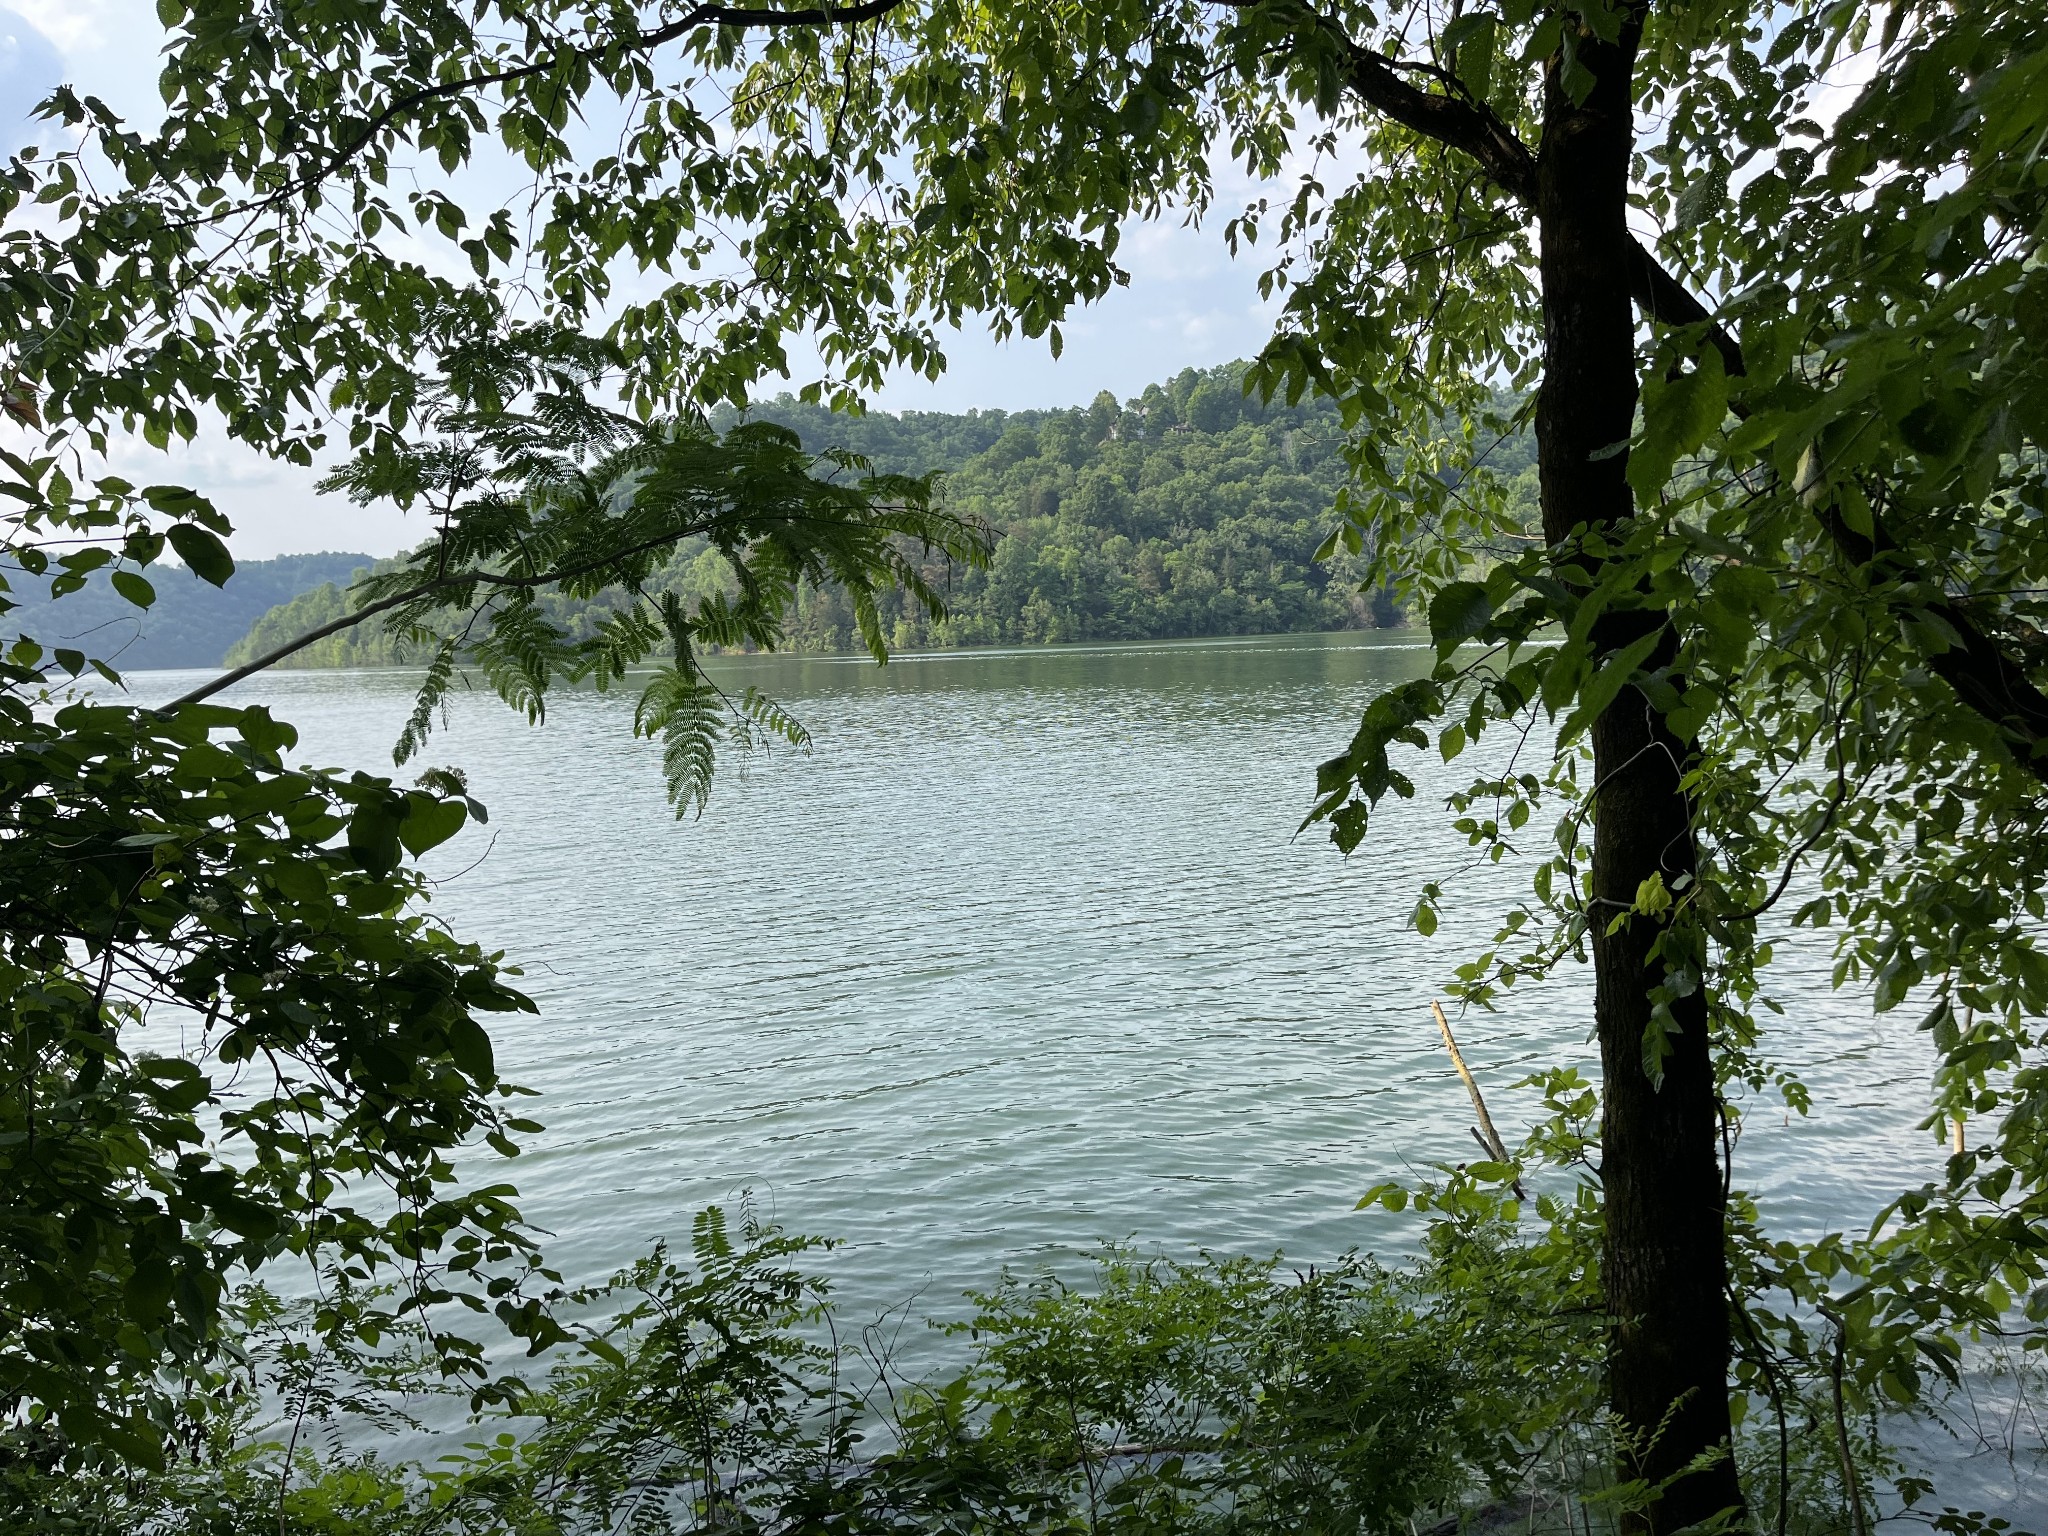 a view of a lake with a tree